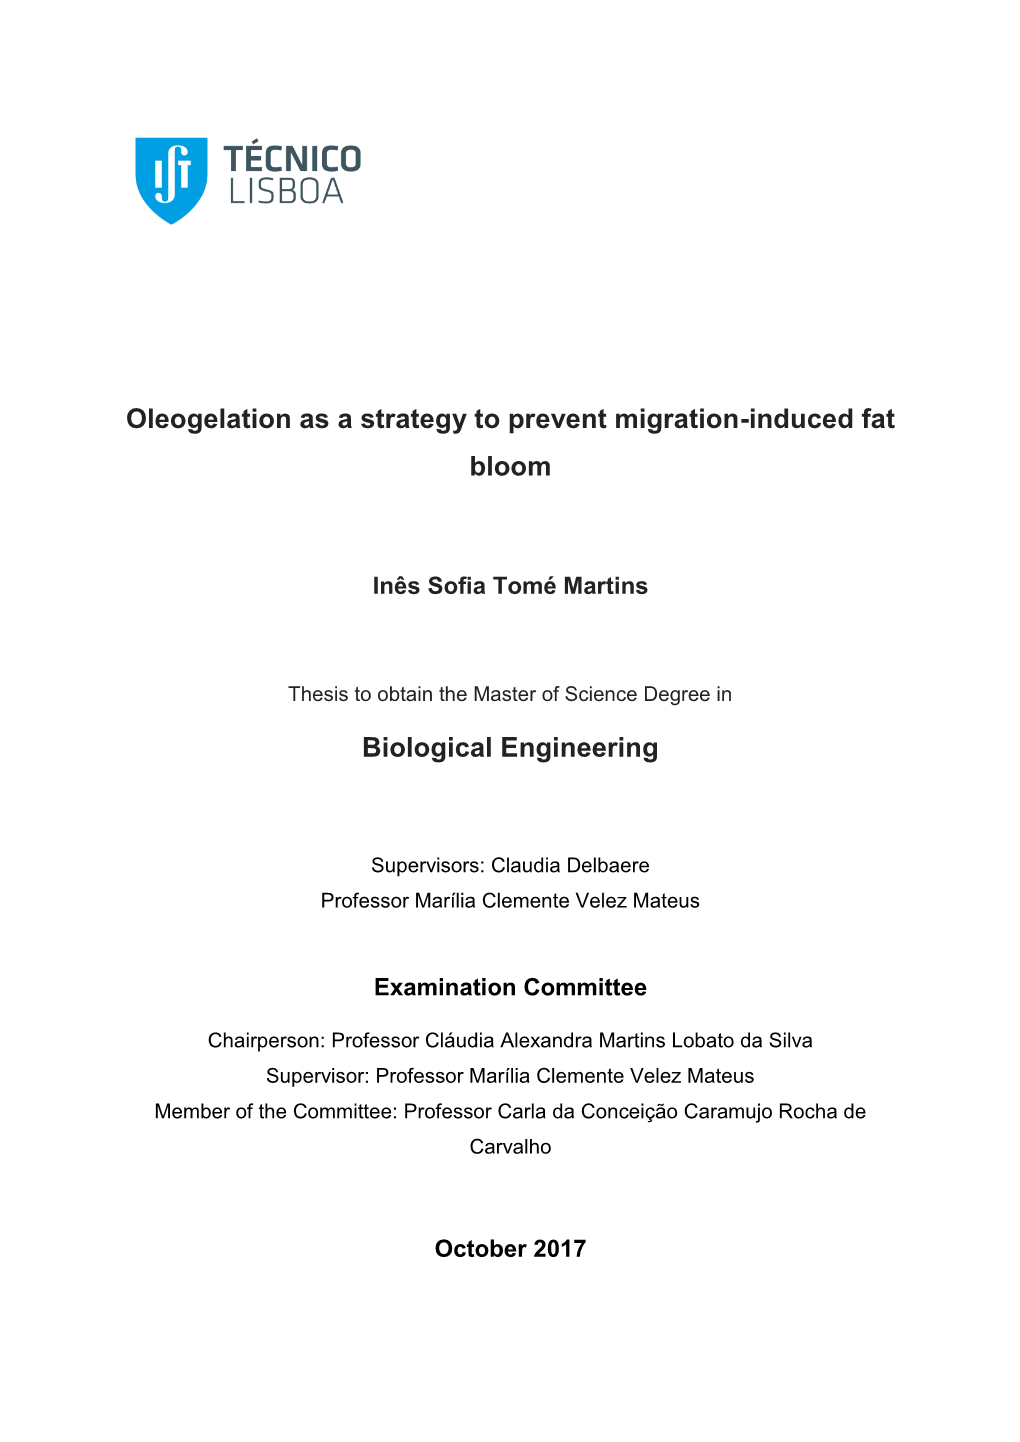 Oleogelation As a Strategy to Prevent Migration-Induced Fat Bloom